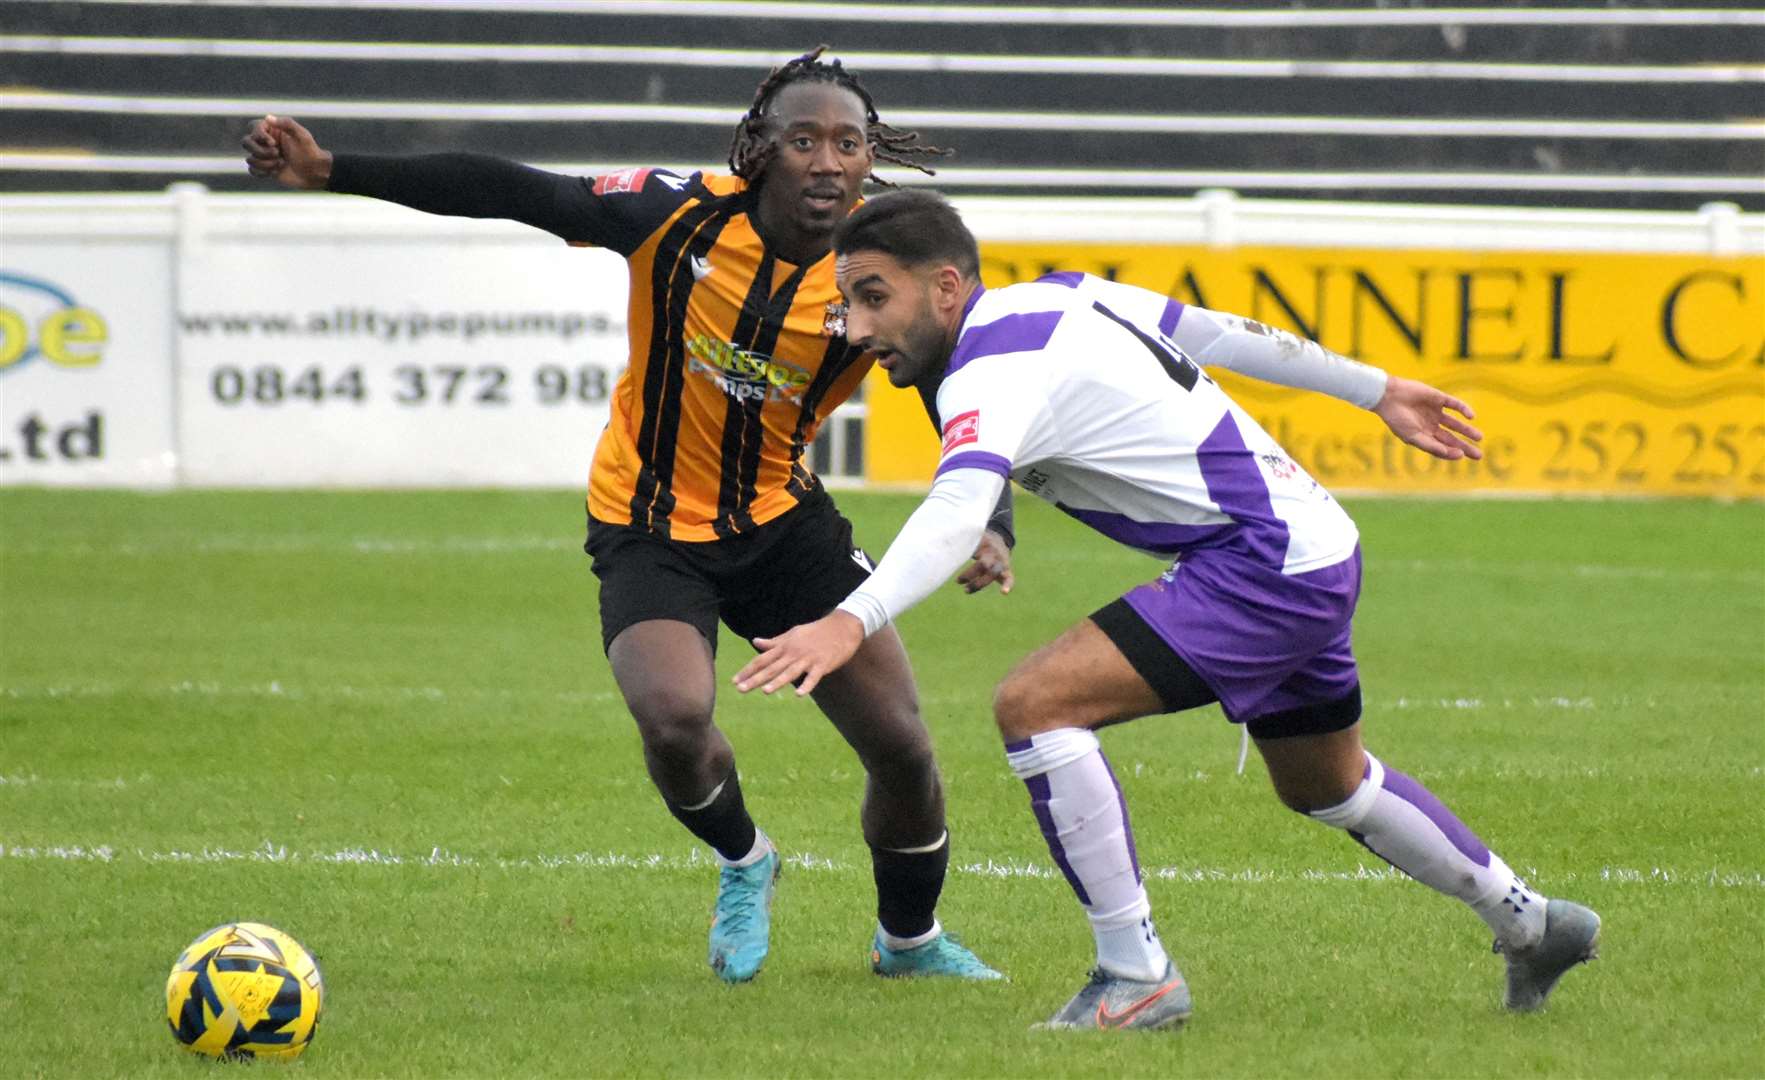 Folkestone's Kadell Daniel battles for the ball in their 3-1 weekend win over Brightlingsea. Picture: Randolph File